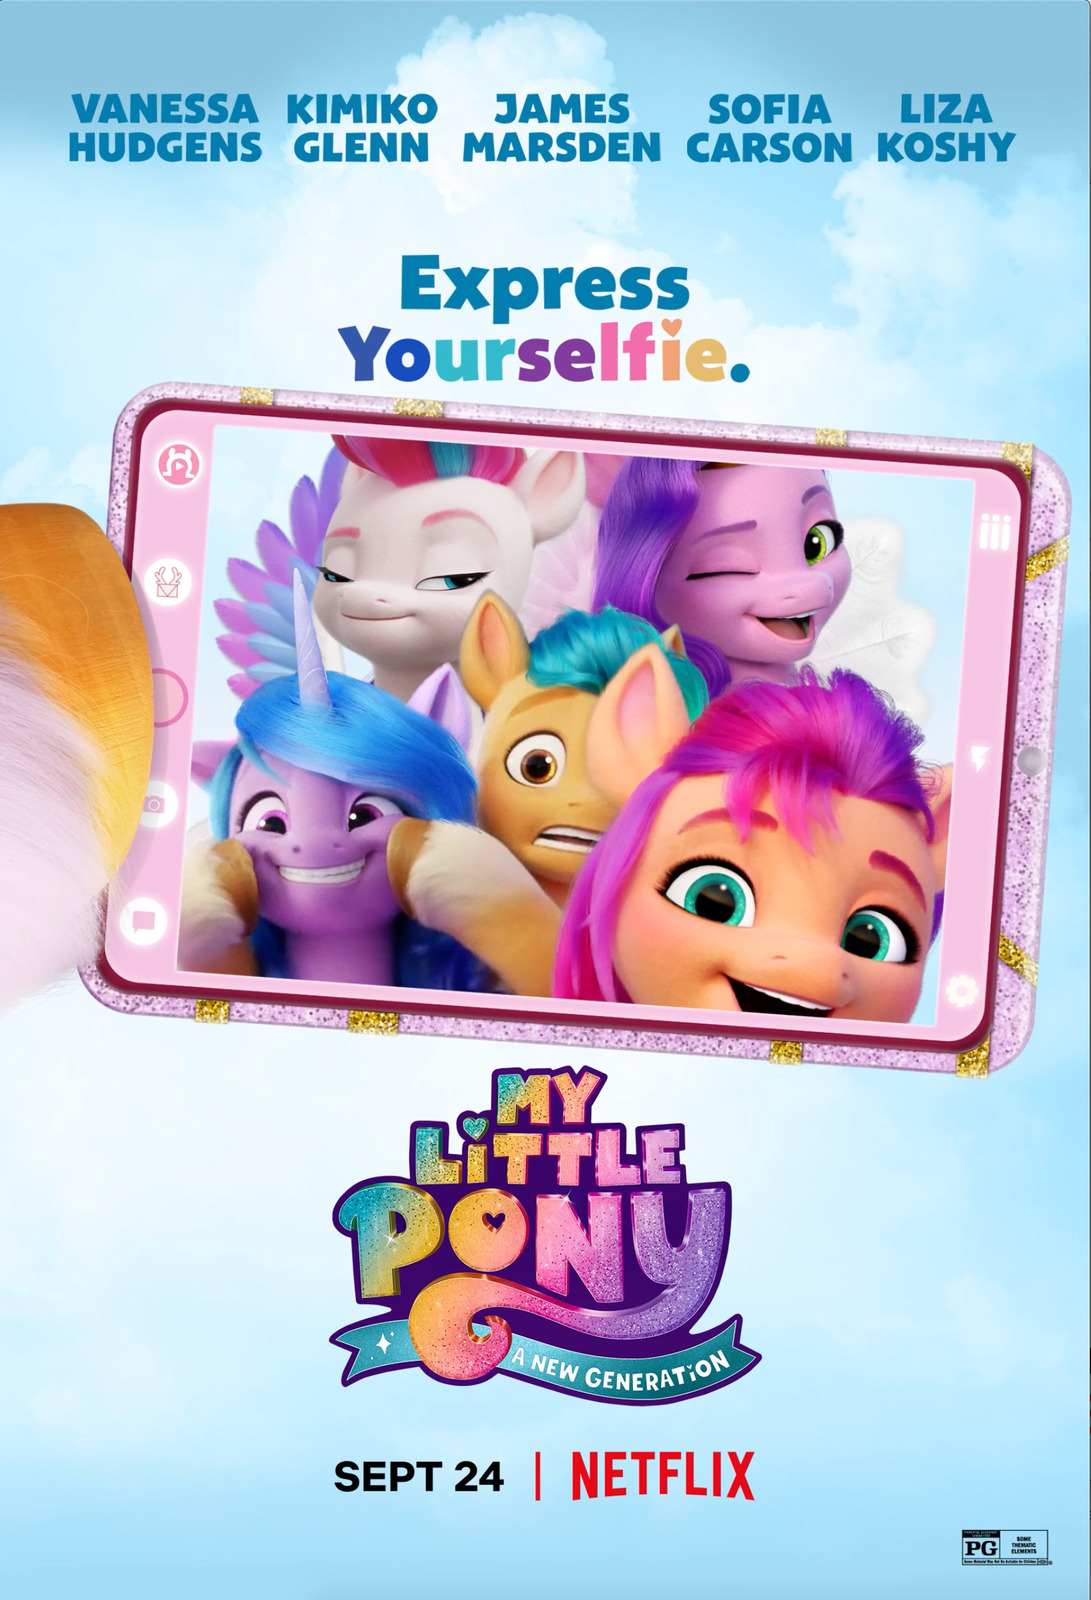 My Little Pony A New Generation Poster Animated Movie Art Film Print 24x36 27x40